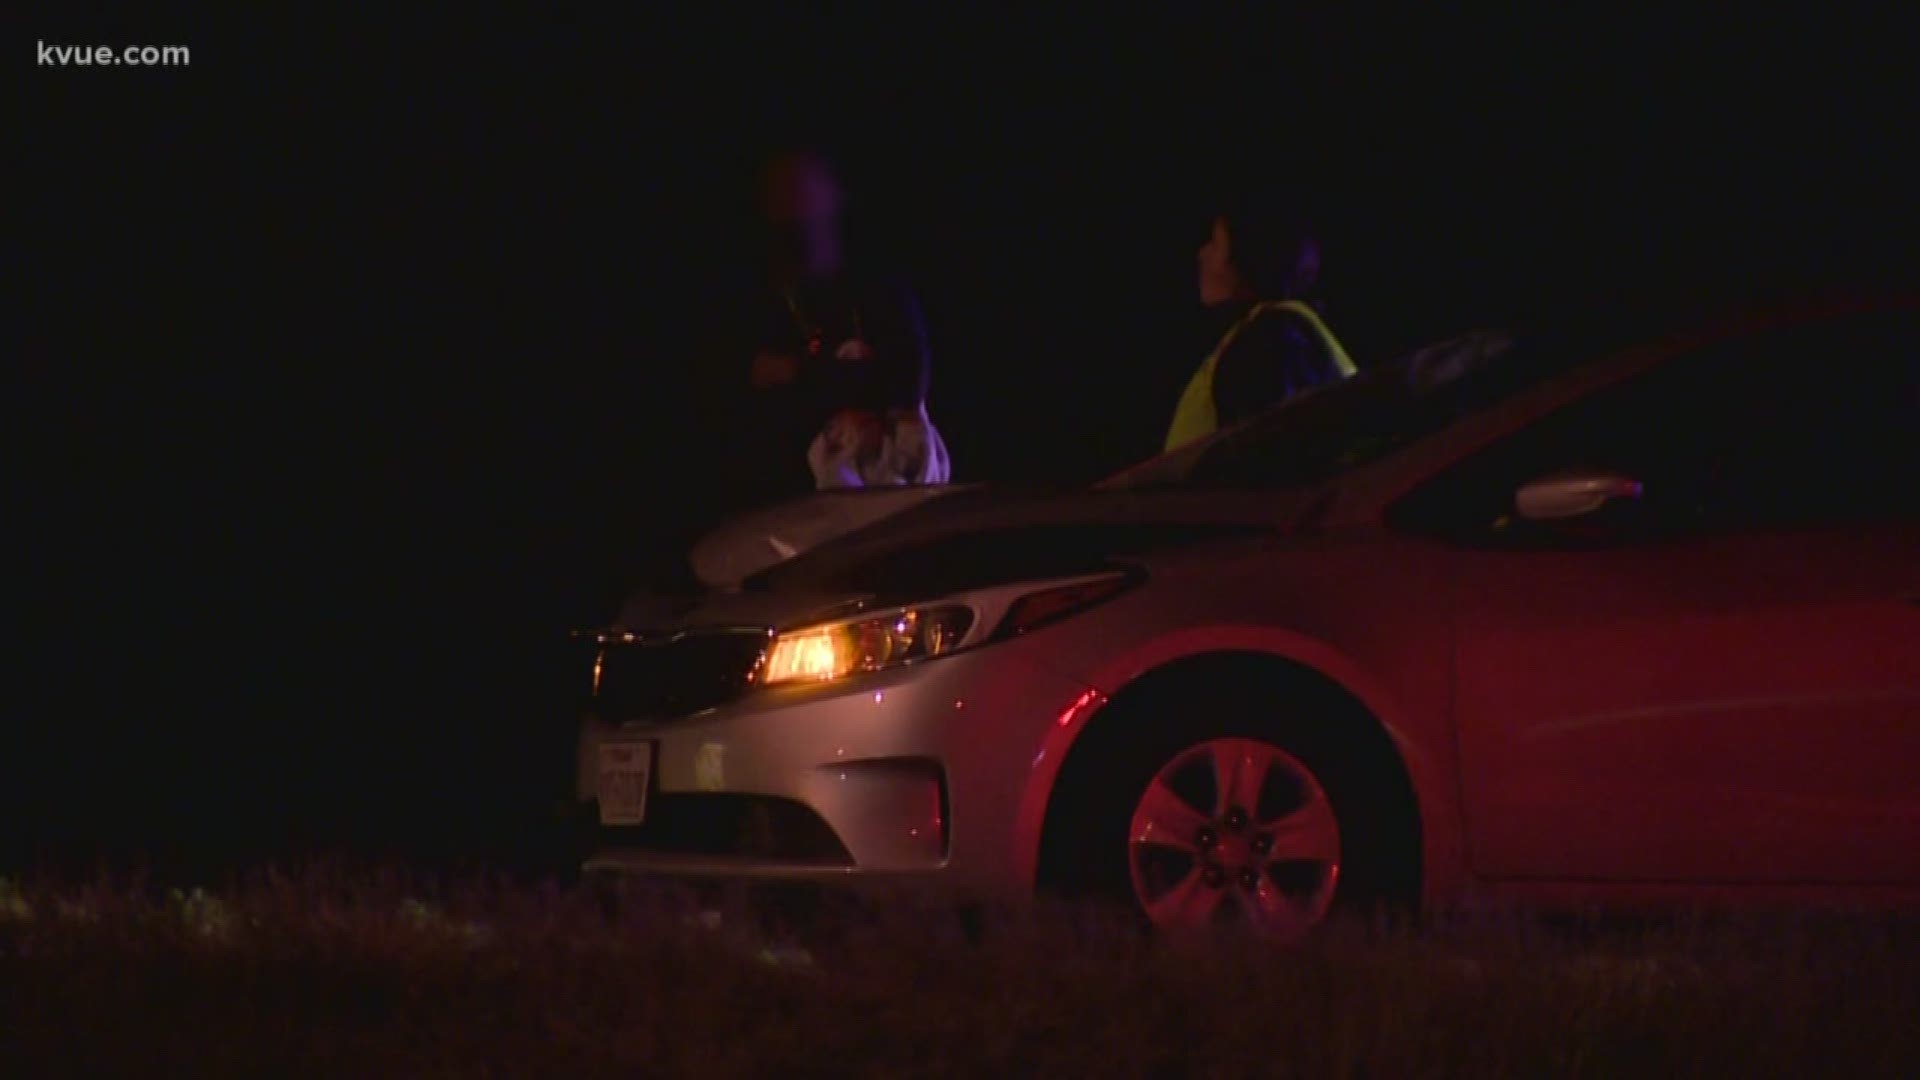 A man was struck by a vehicle Tuesday evening near the Barton Creek Greenbelt on South Capital of Texas Highway.